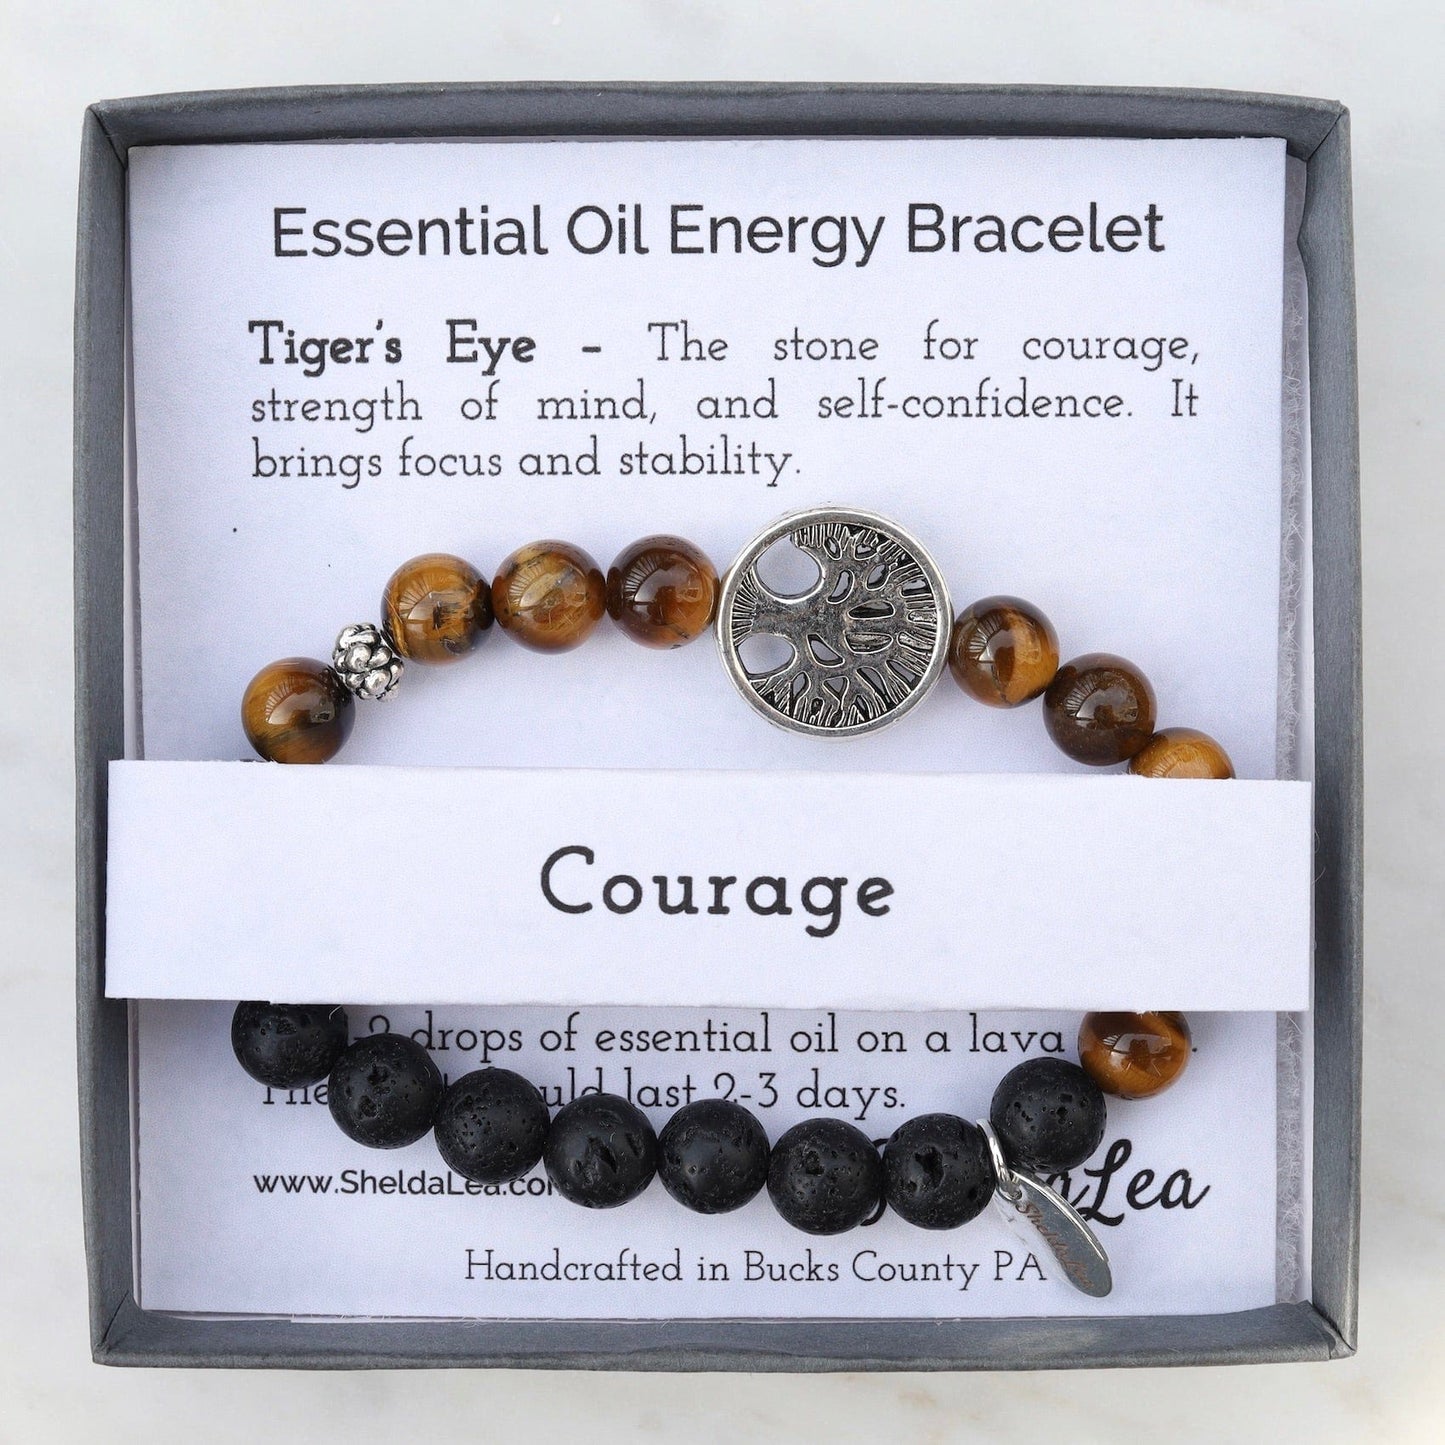 BRC Essential Oil Energy Bracelet - Tiger's Eye with Tree of Life - Courage